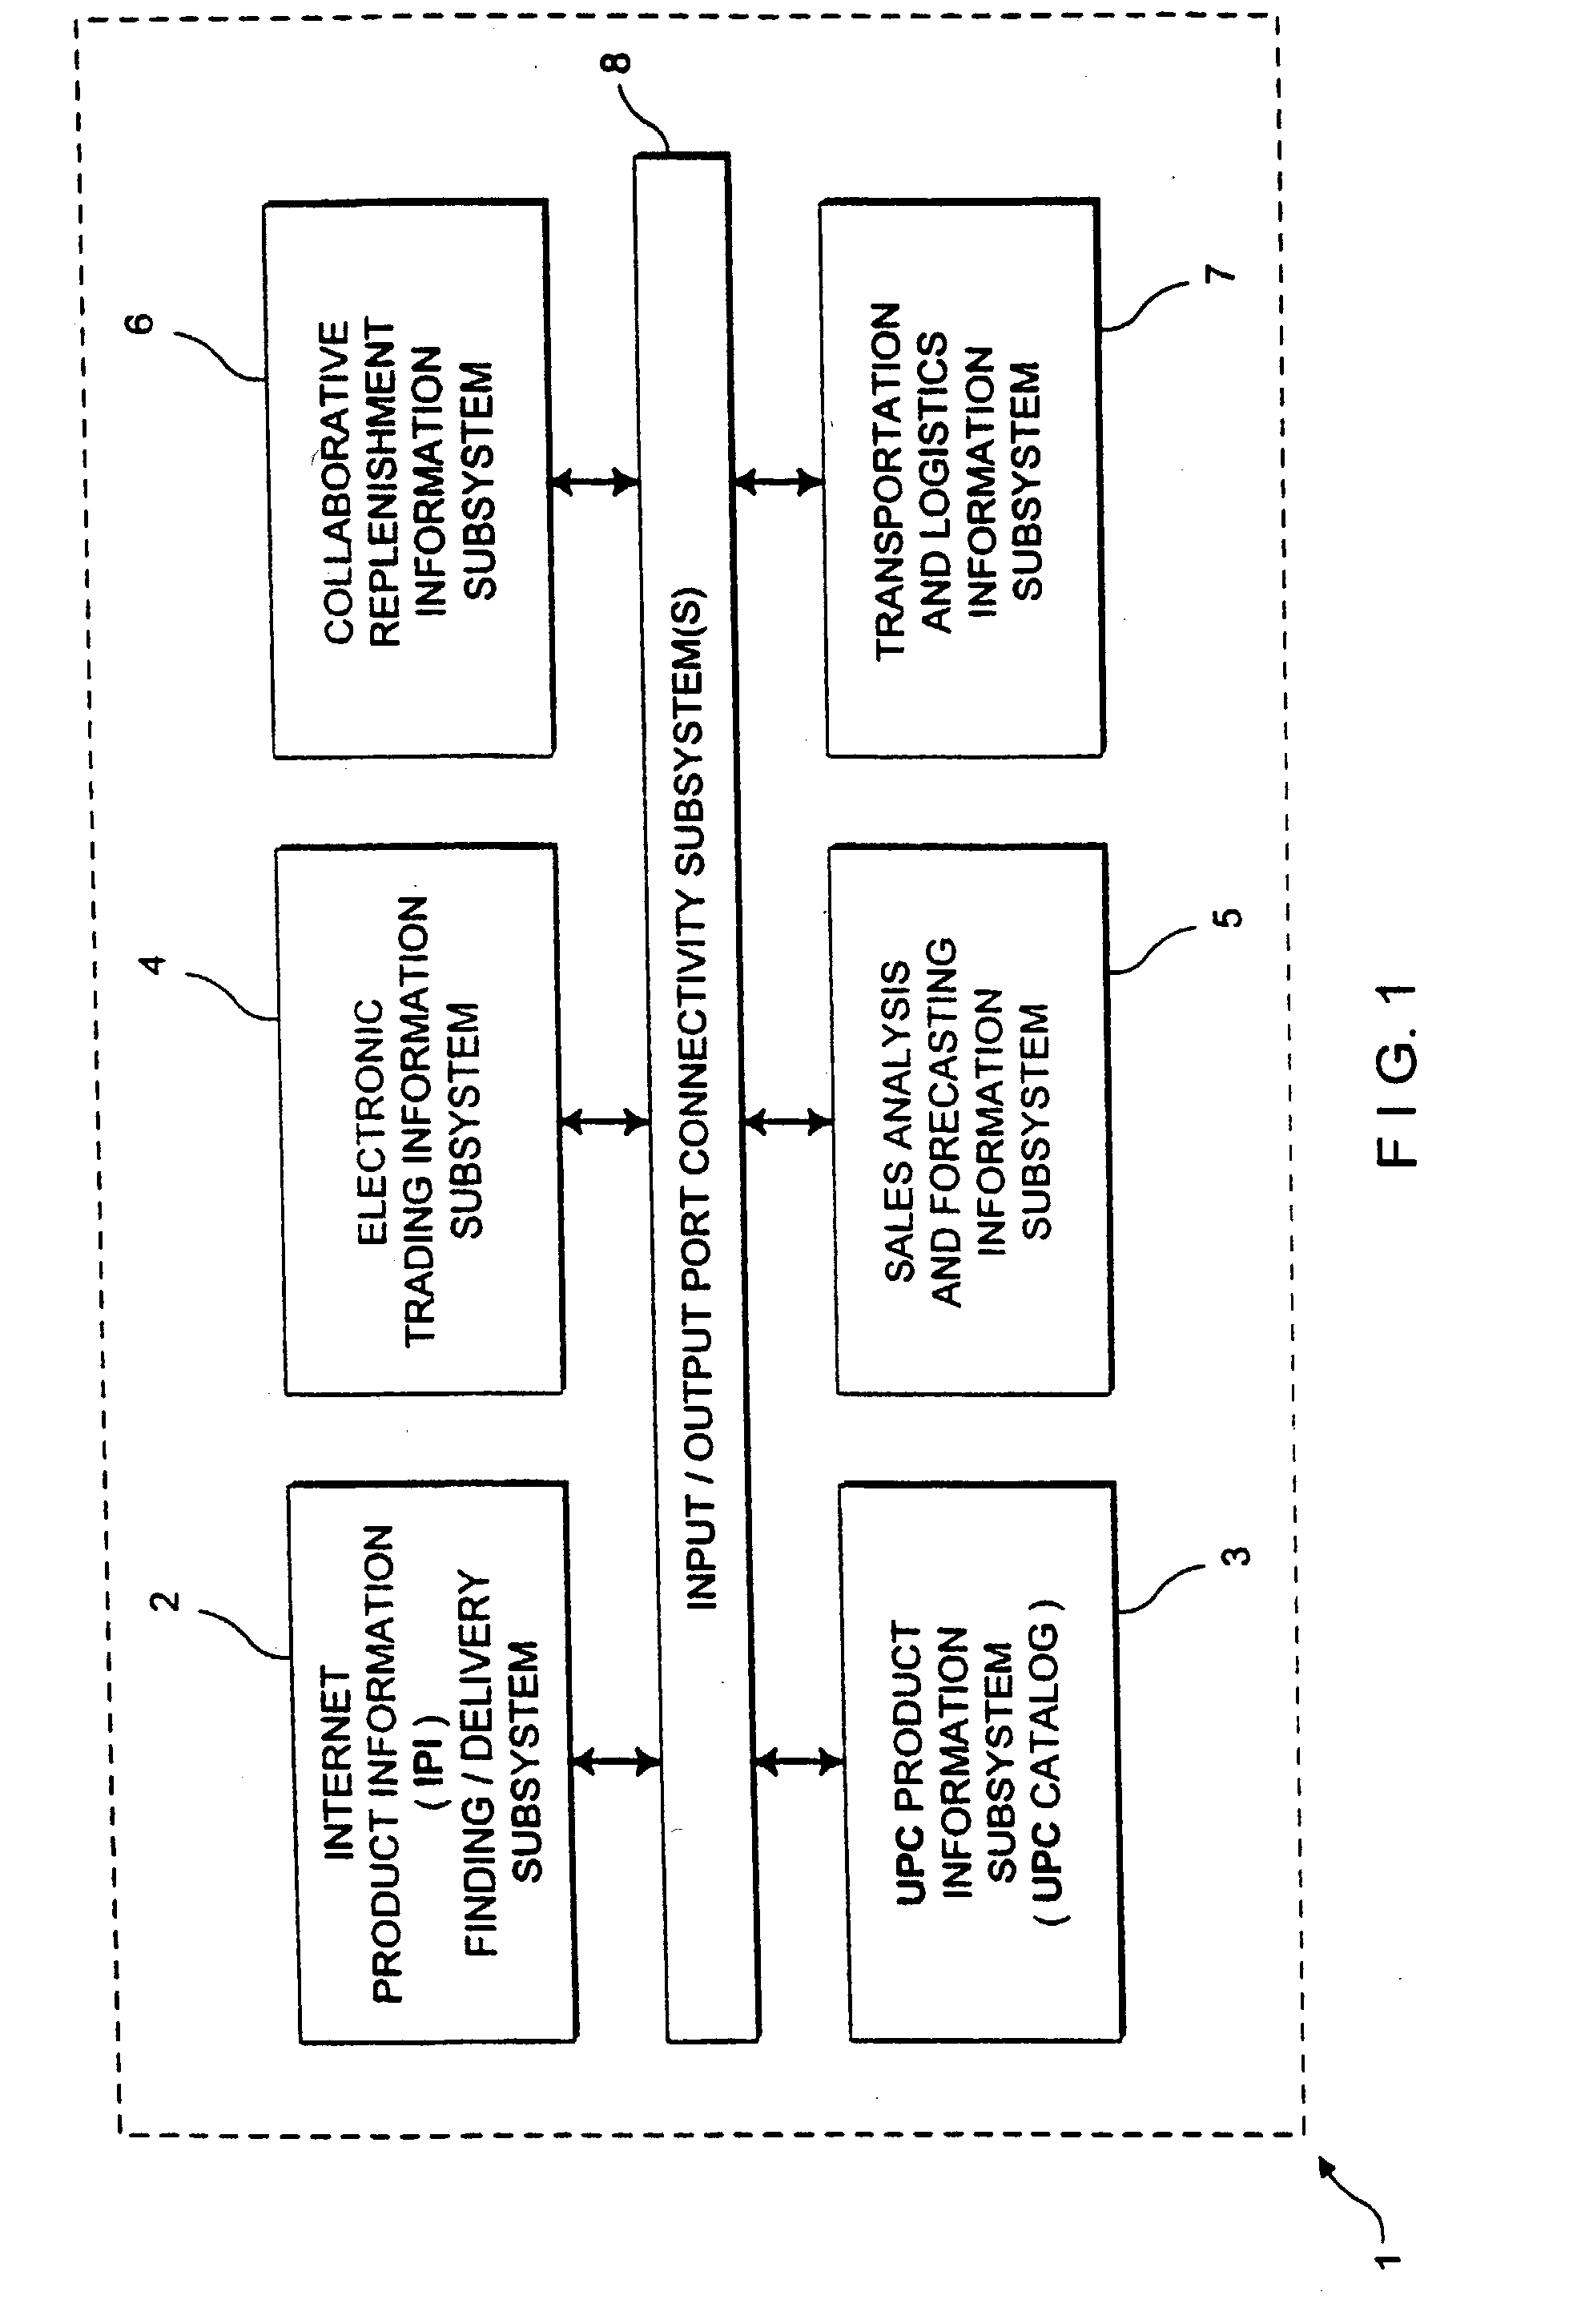 Internet-based method of and system for enabling communication of consumer product information between vendors and consumers in a stream of commerce, using vendor created and managed UPN/TM/PD/URL data links